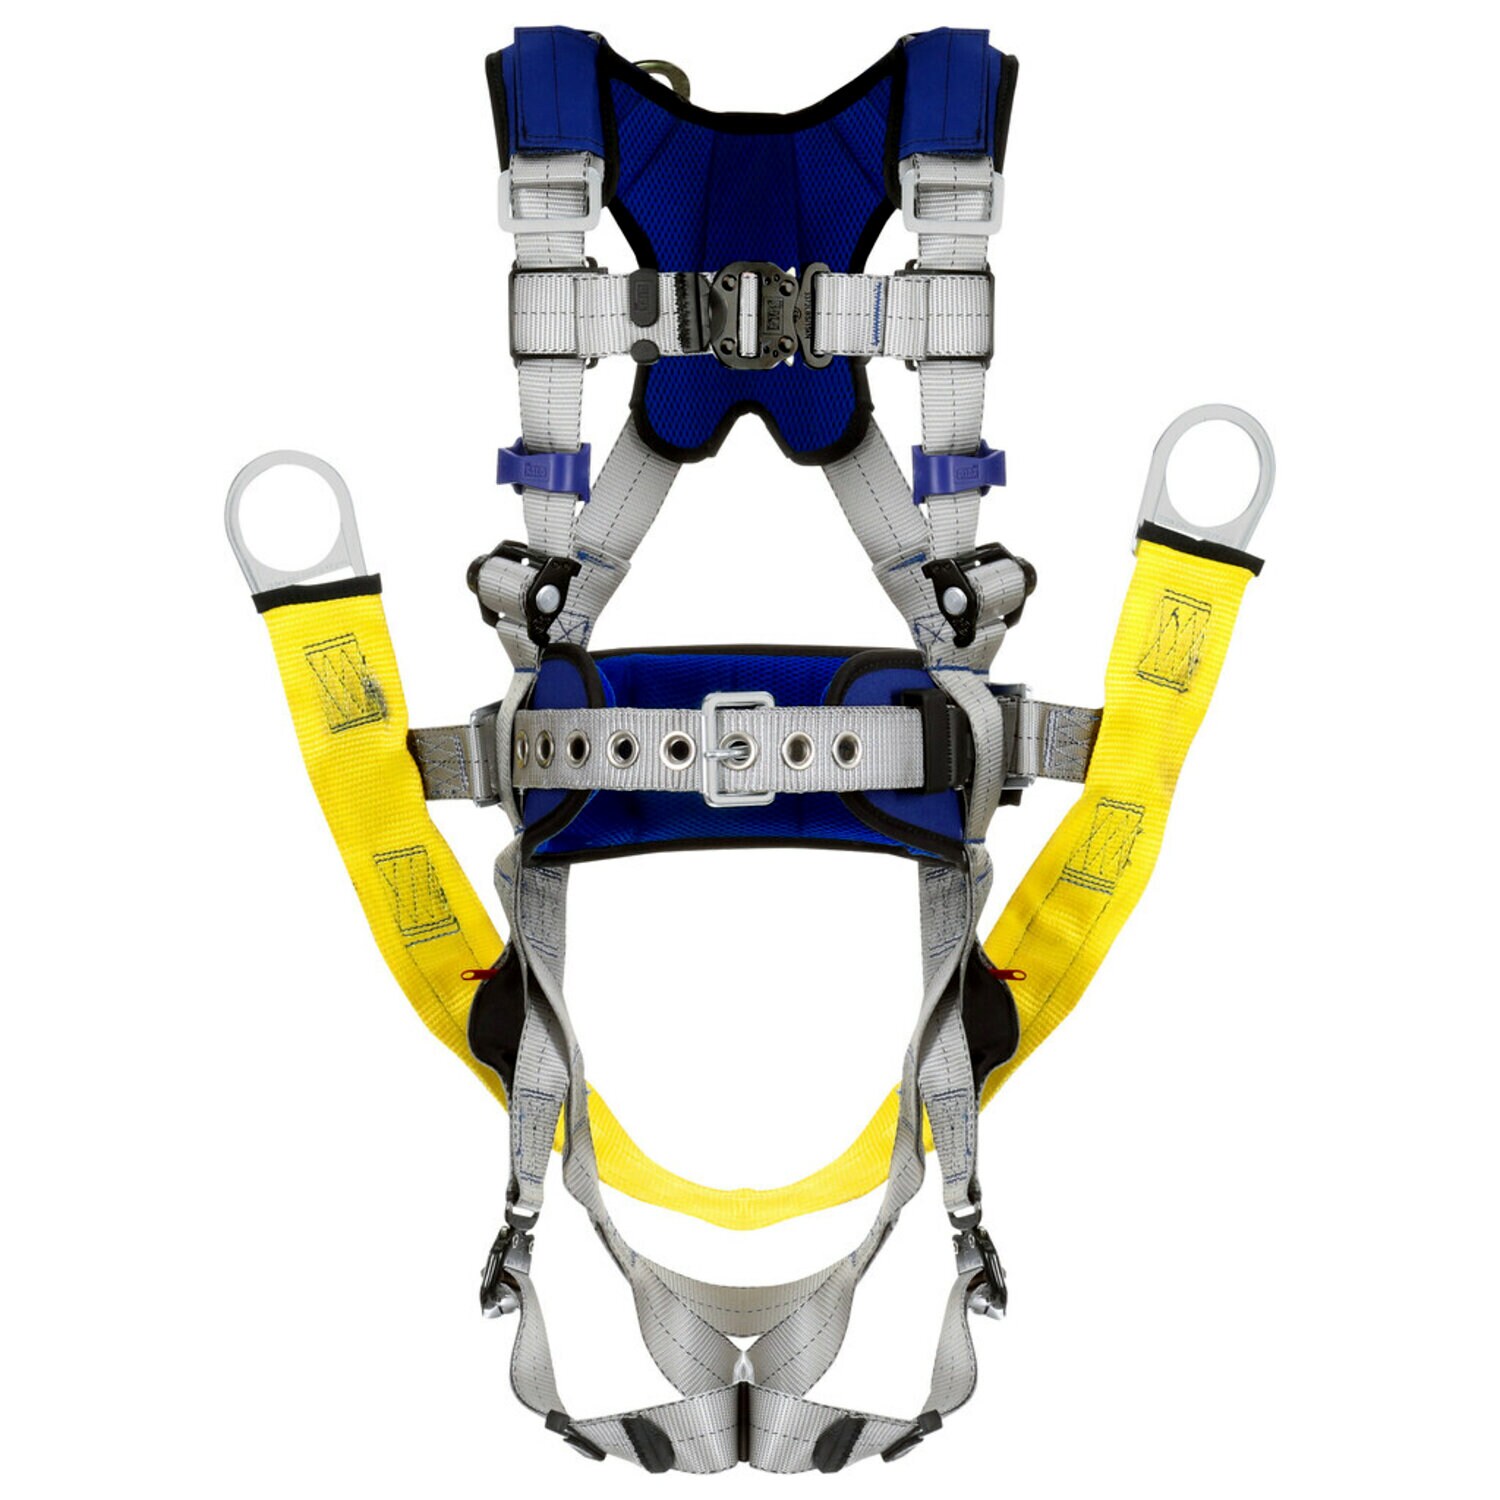 7012828657 - 3M DBI-SALA ExoFit X100 Comfort Oil & Gas Climbing/Suspension Safety Harness 1401208, X-Large, Energy Absorber Extension